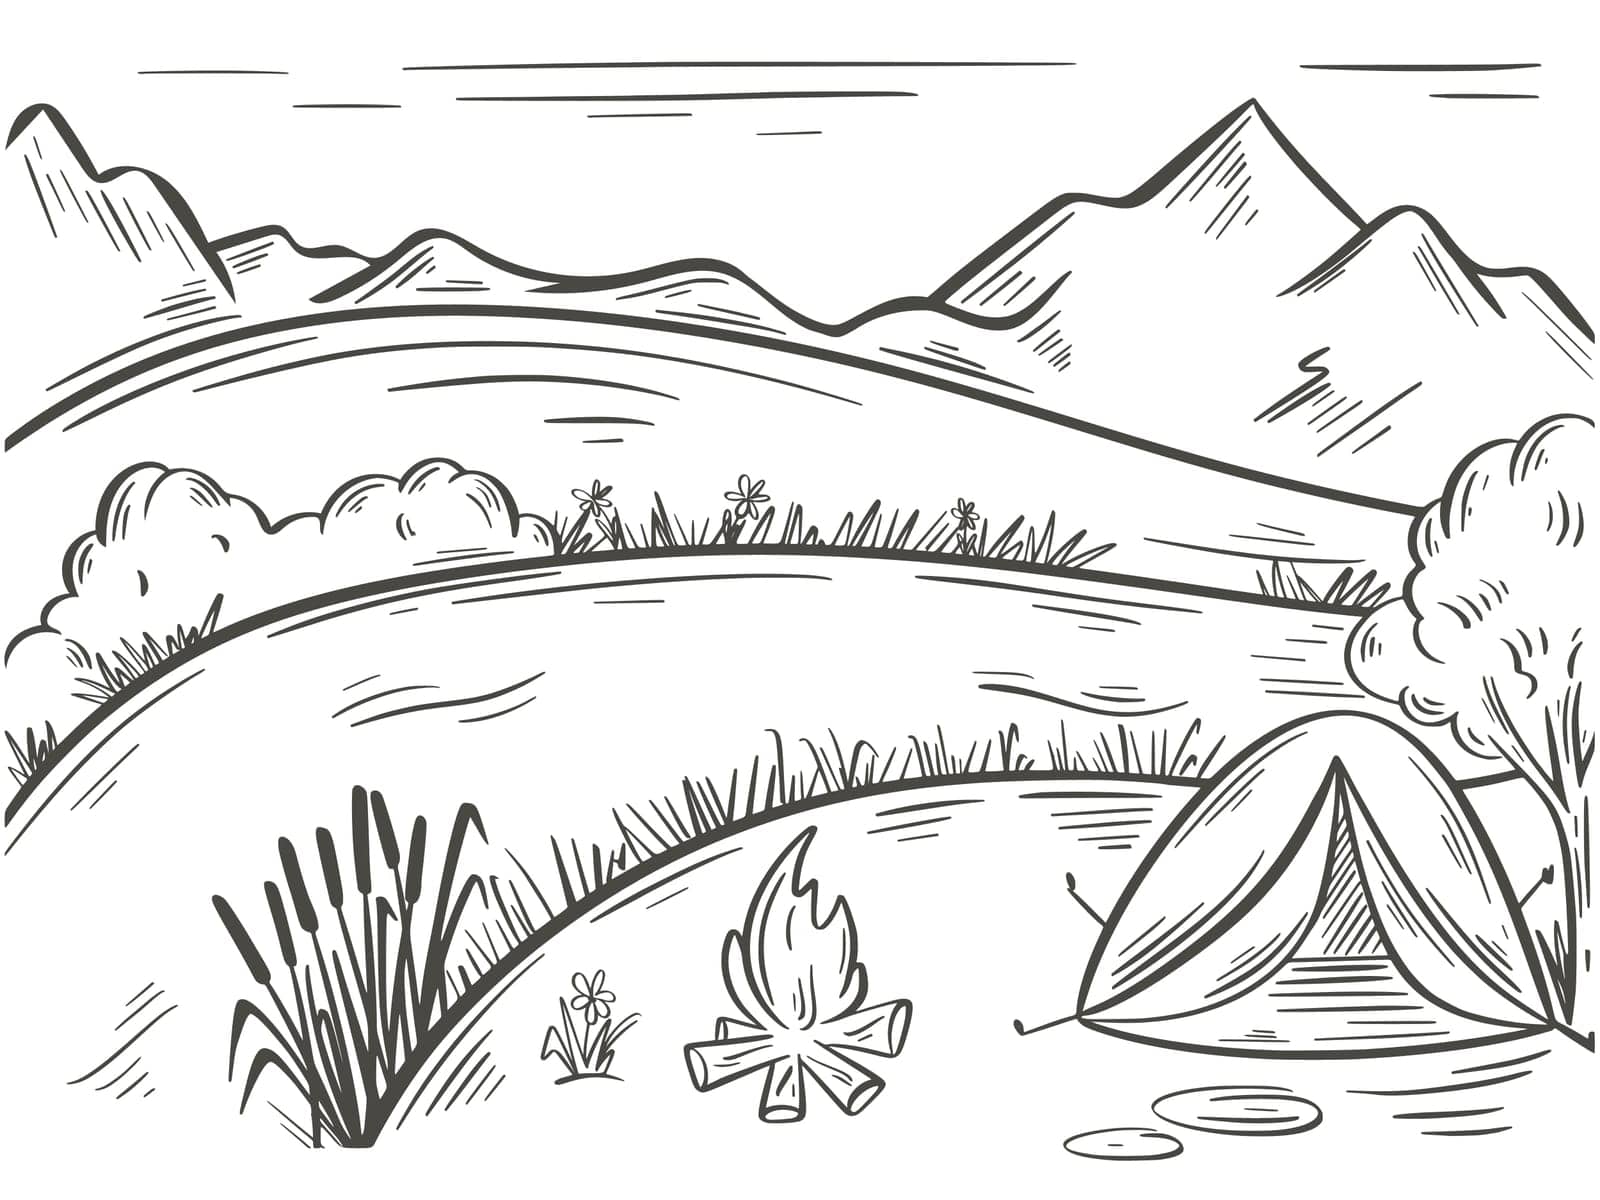 Tourist tent near river against backdrop of mountains. Camping, ink doodle sketch. Hiking and camping trip hand engraving. Hand drawn natural landscape, vector illustration